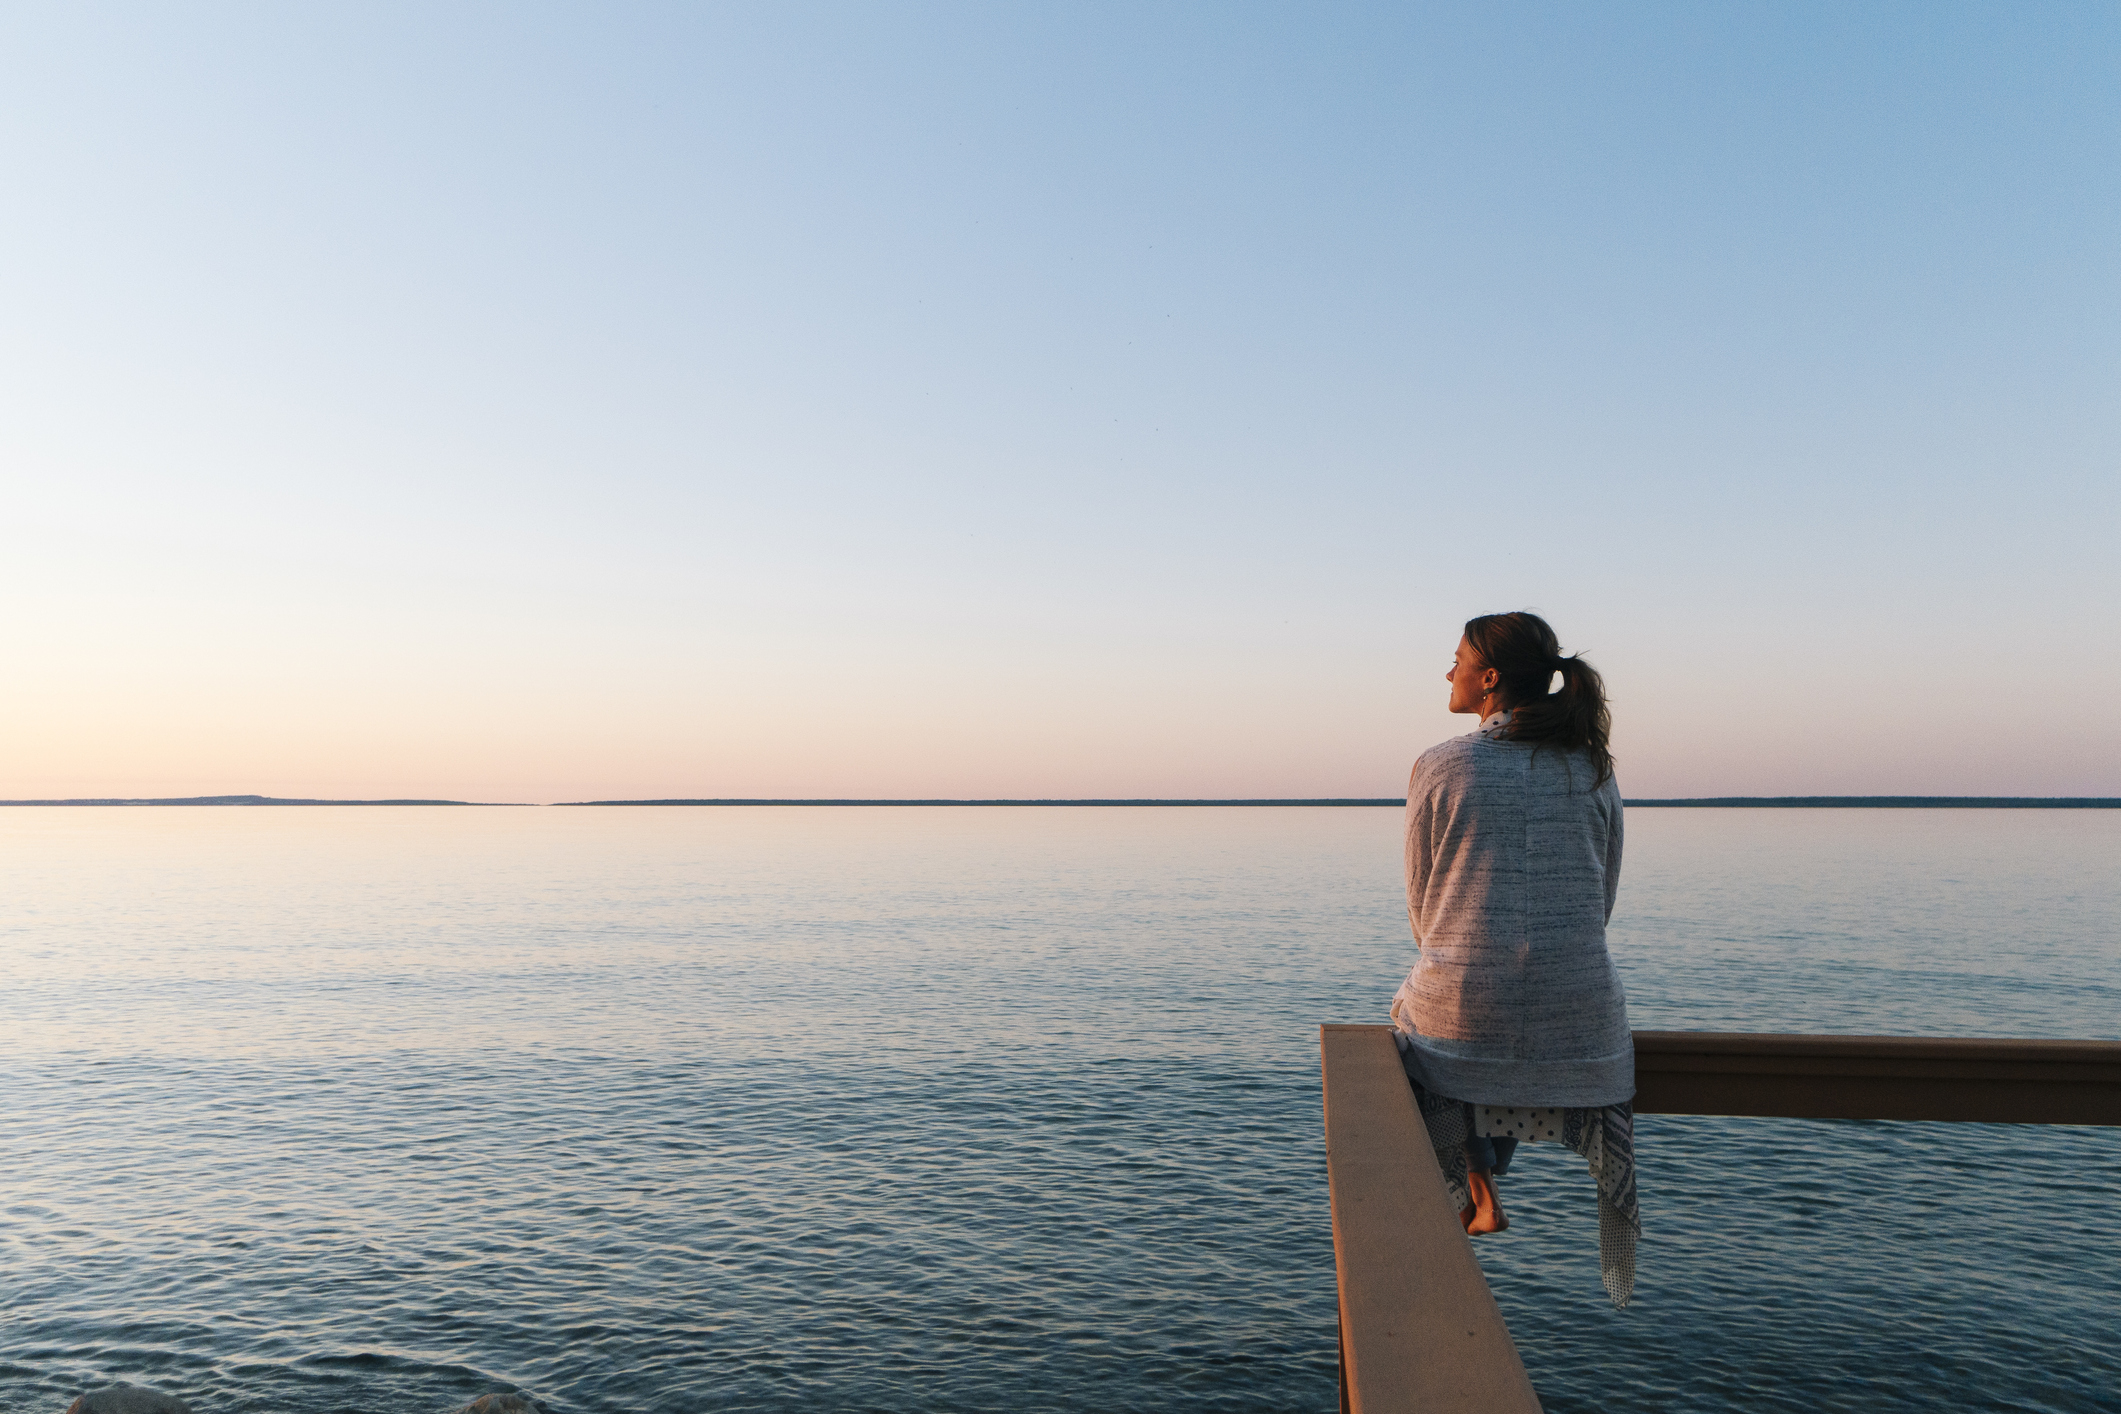 A woman sitting on a ledge over the ocean looking out